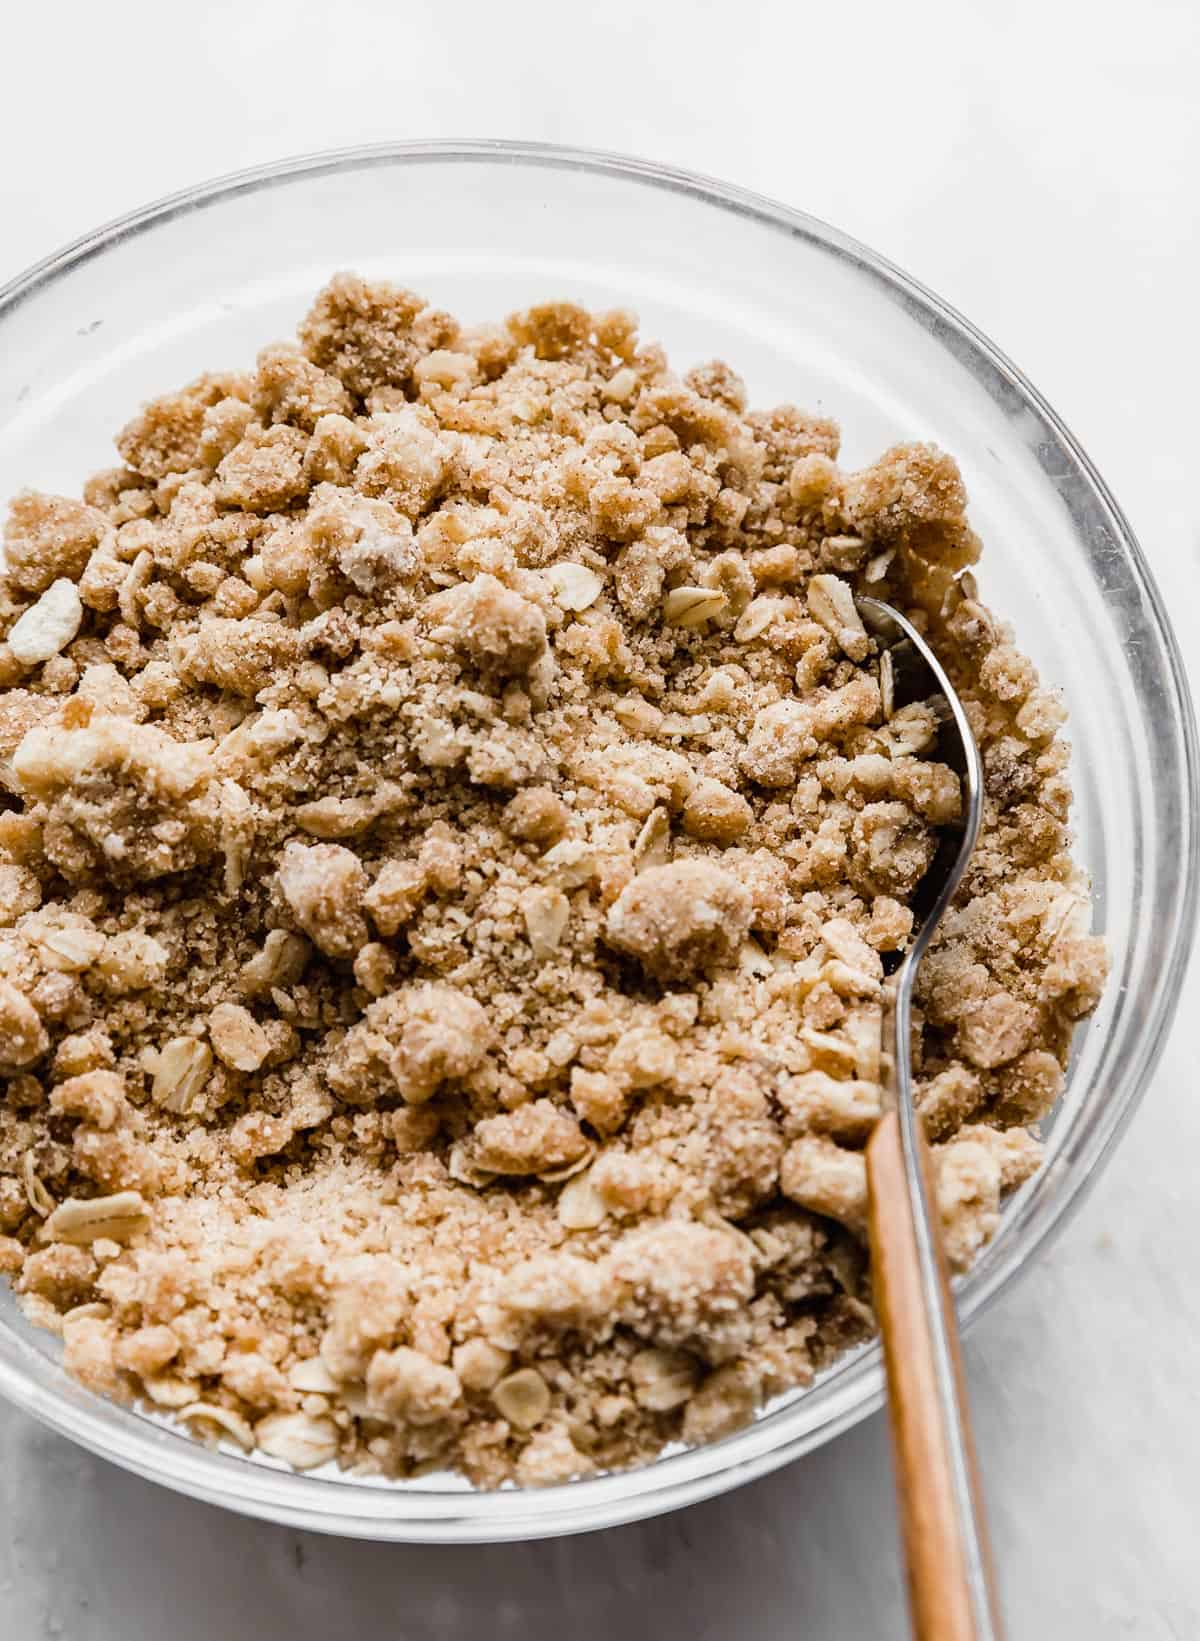 A close photo of Streusel Topping Recipe with oats, in a glass bowl on a white background.